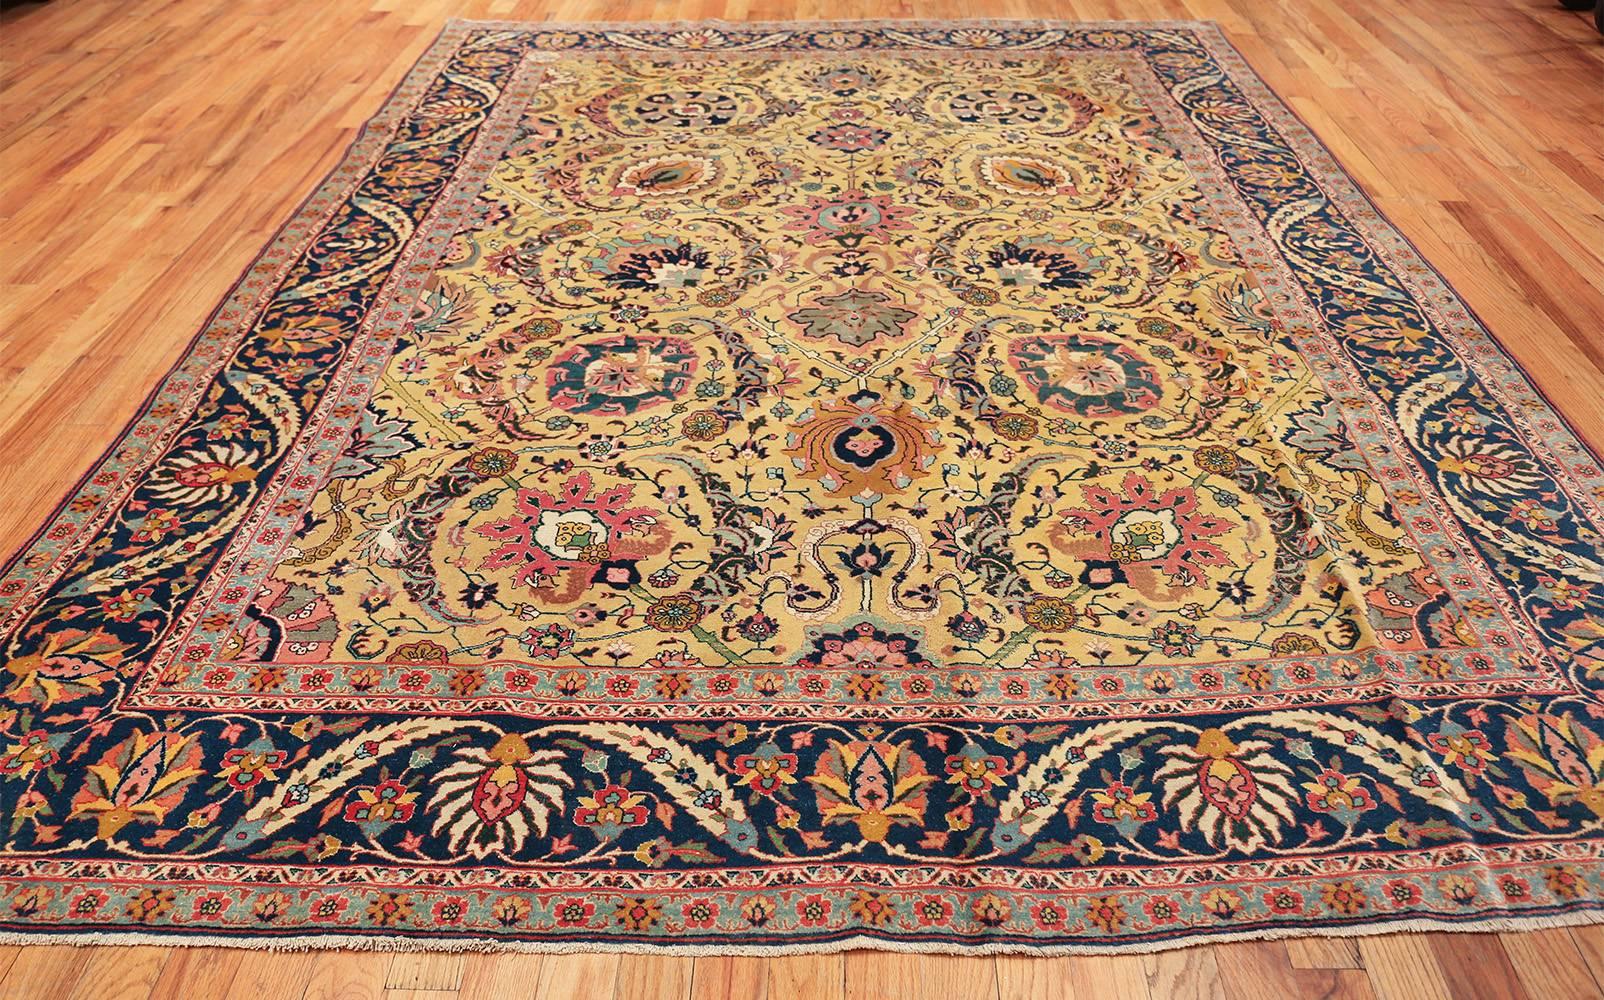 Antique Persian sickle leaf Tabriz rug, country of origin: Persia, date: circa early 20th century. Size: 9 ft x 12 ft (2.74 m x 3.66 m)

The well-executed curvilinear floral motifs of this Tabriz rug suggest a high knot count that allows a fluid